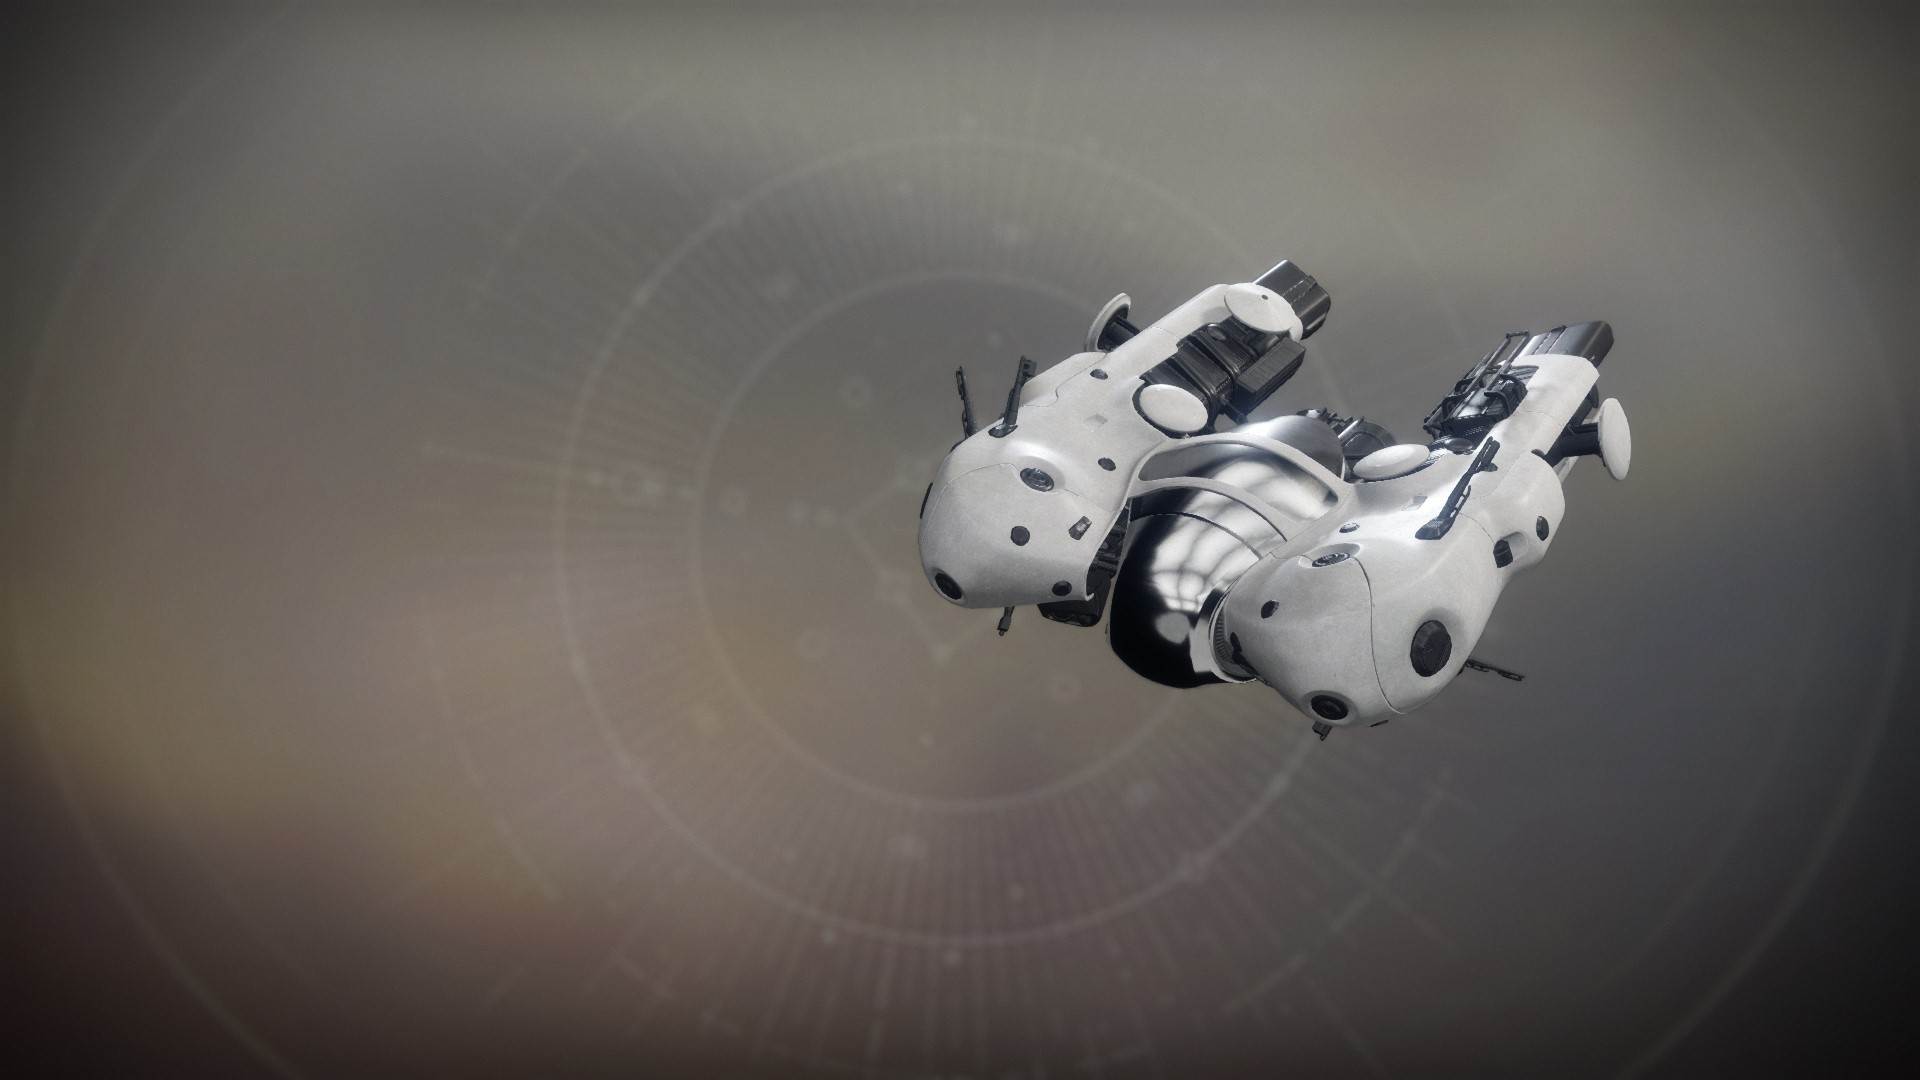 An in-game render of the Nautilus Zero.